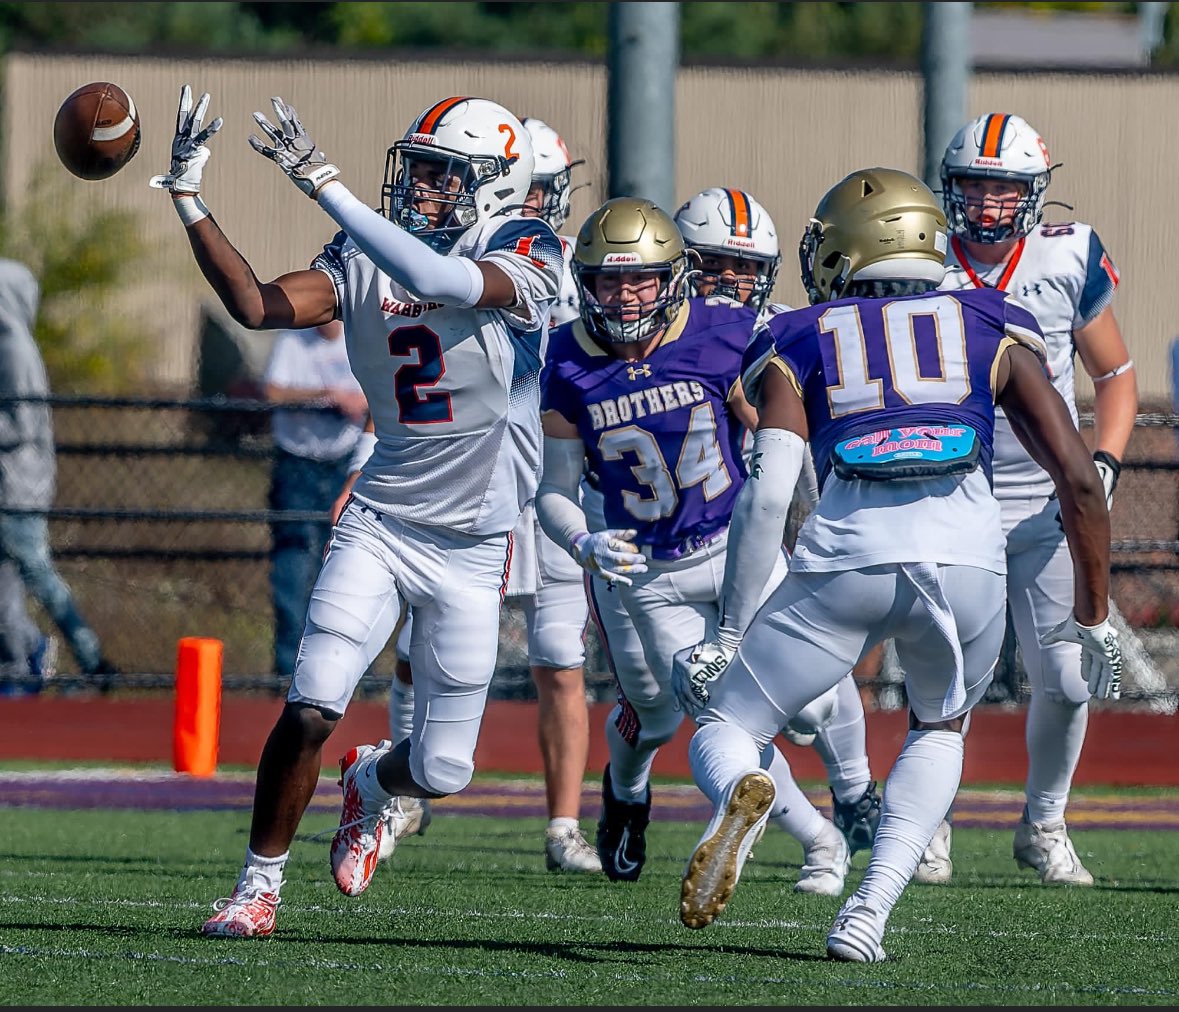 An amazing season thank you to @LCSDAthletics for a great 3 years and allowing me to continue my journey, looking forward to the next step in life. 10 Rec 121 yrds 2TD hudl.com/v/2Mbw1g